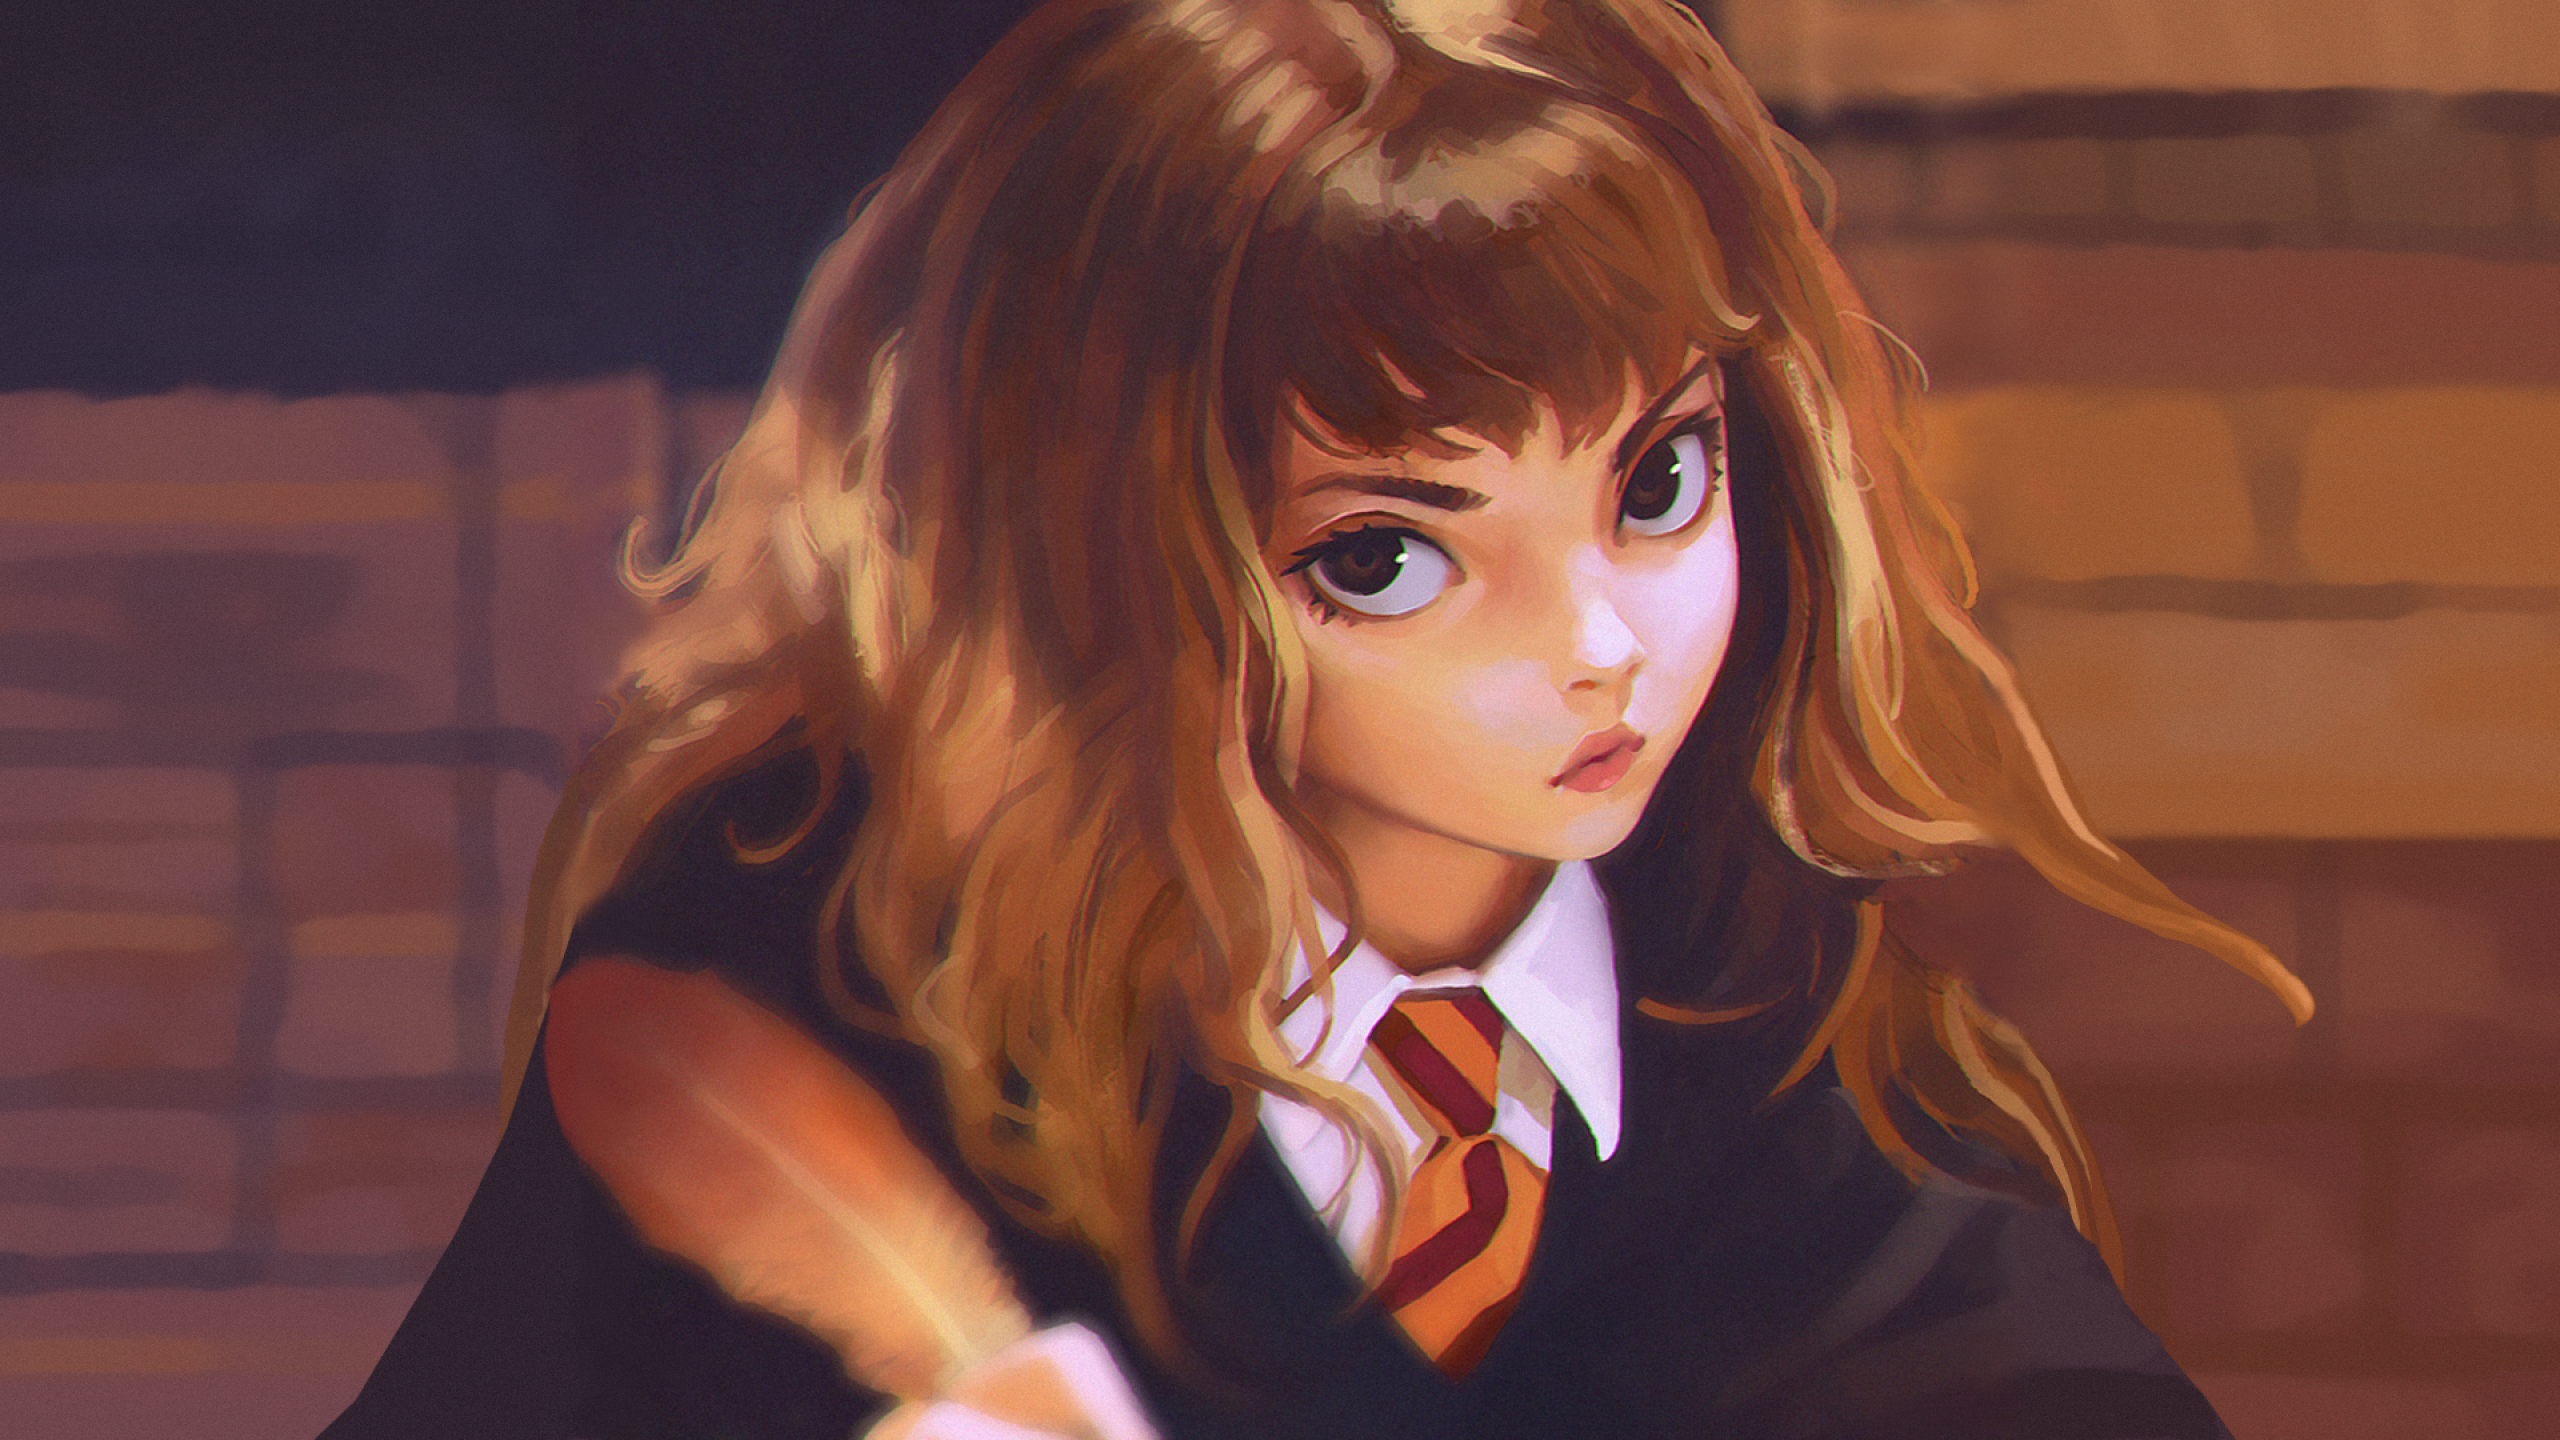 Download 2560x1440 Hermione Granger, Anime Style, Harry Potter, Feather, Semi Realistic Wallpaper for iMac 27 inch